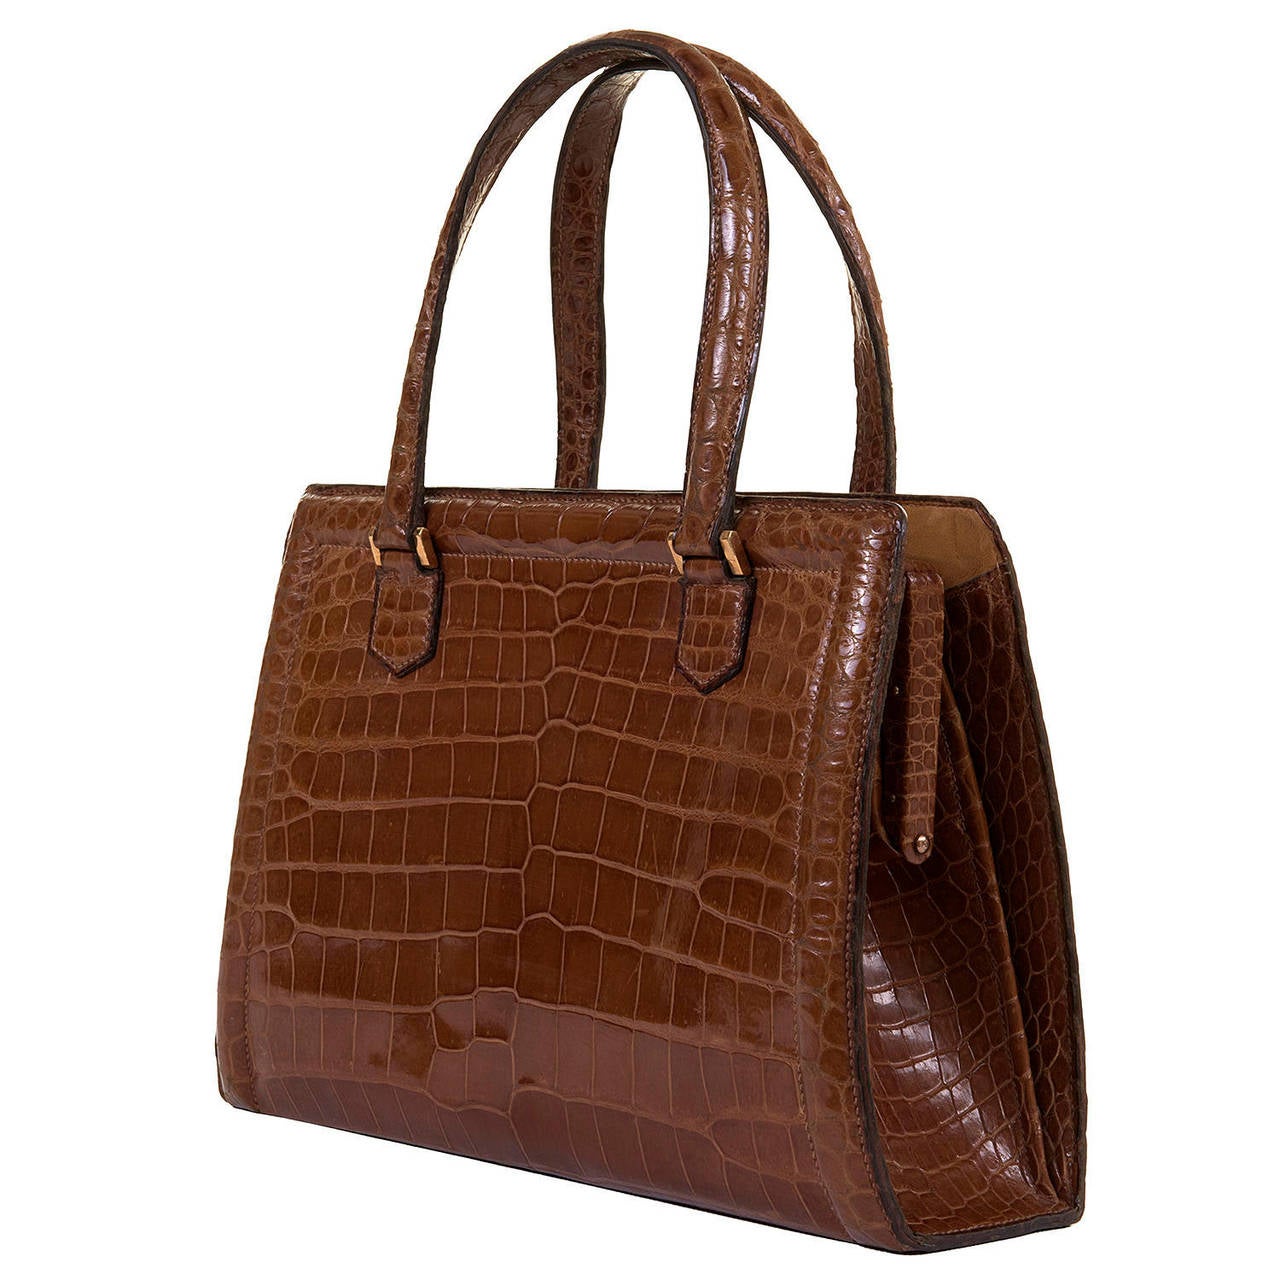 A Stunning & Very Rare Vintage Hermes, 'Sac Pullman' Crocodile Handbag, in a deep Honey coloured Crocodile with Goldtone Hardware. This gorgeous bag is in excellent, little used condition, and if this iconic Bag was available to buy today, new, it